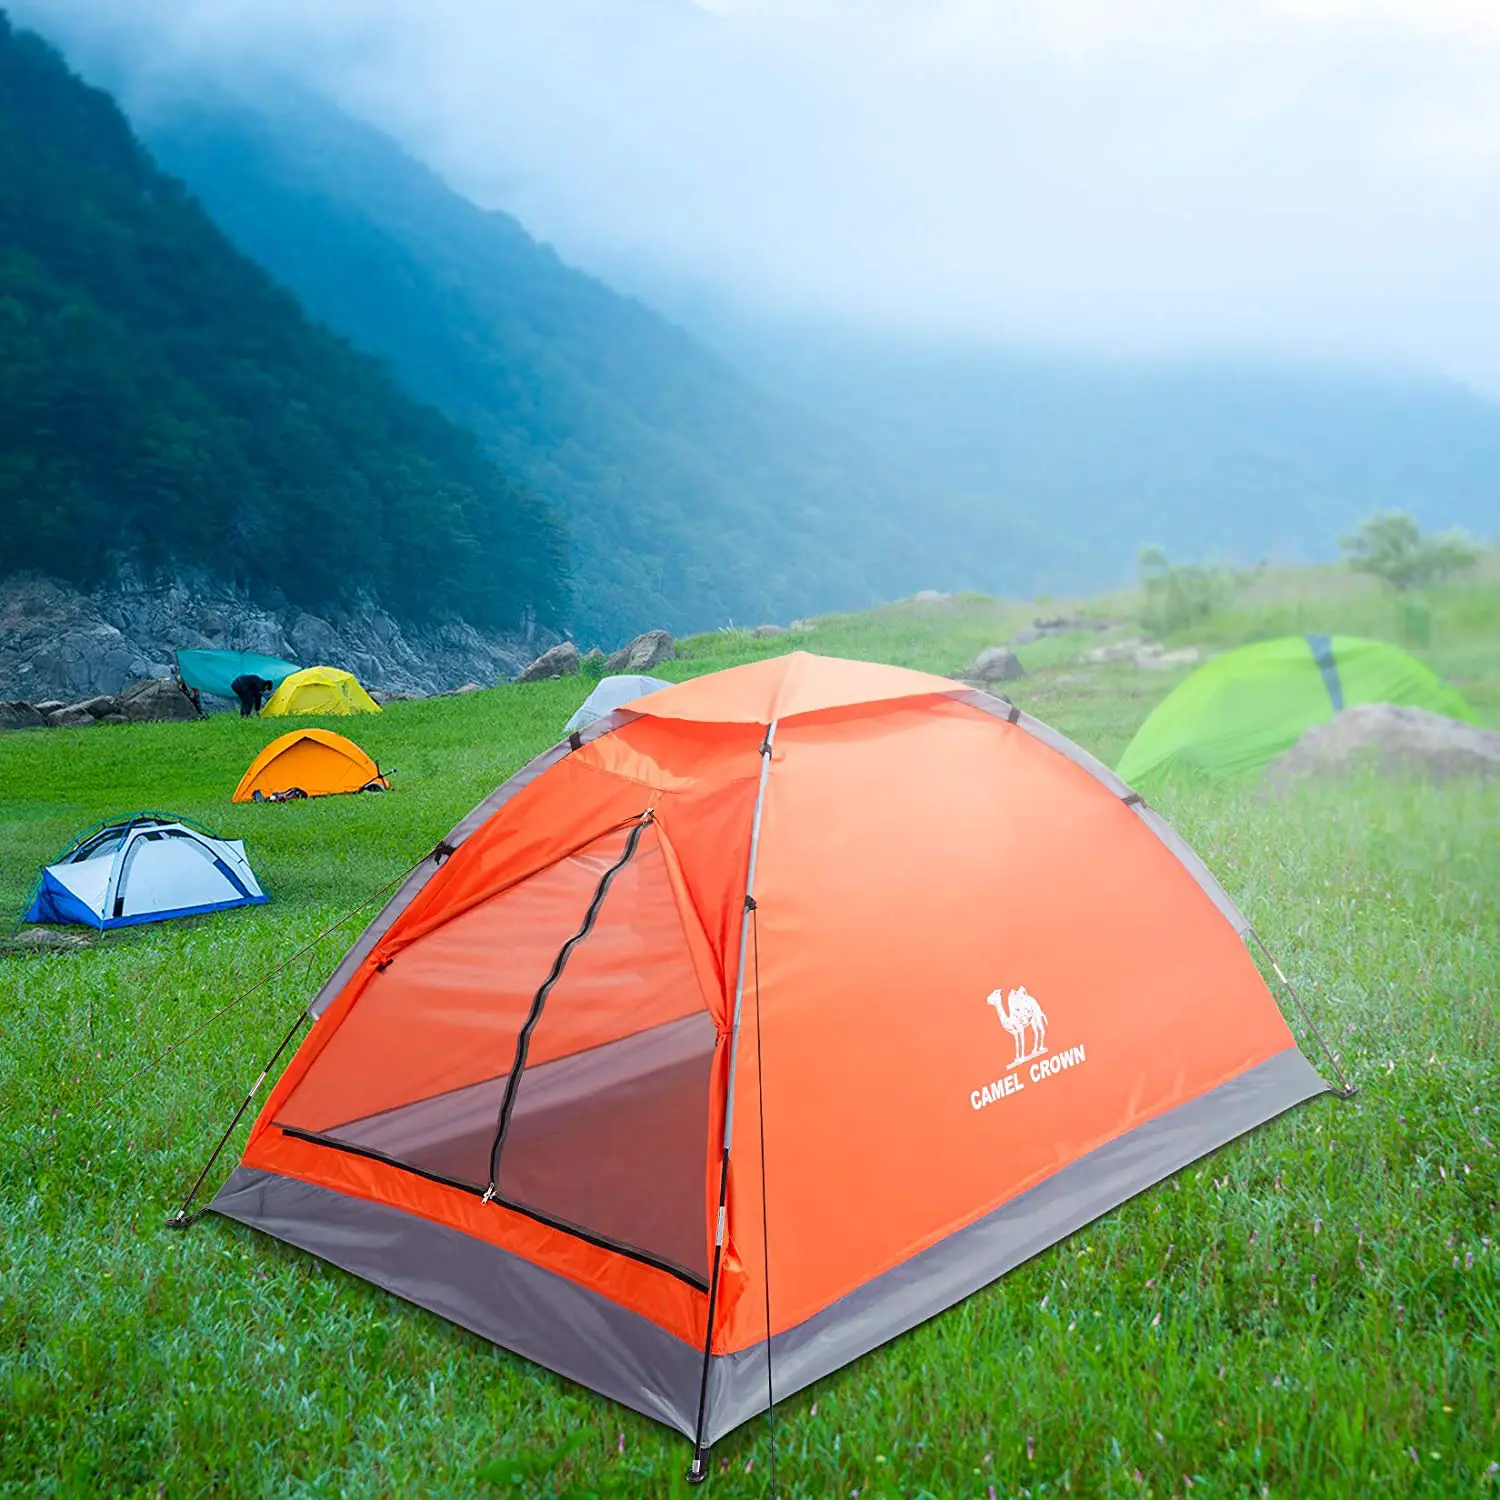 orange tent in foreground of field with other tents